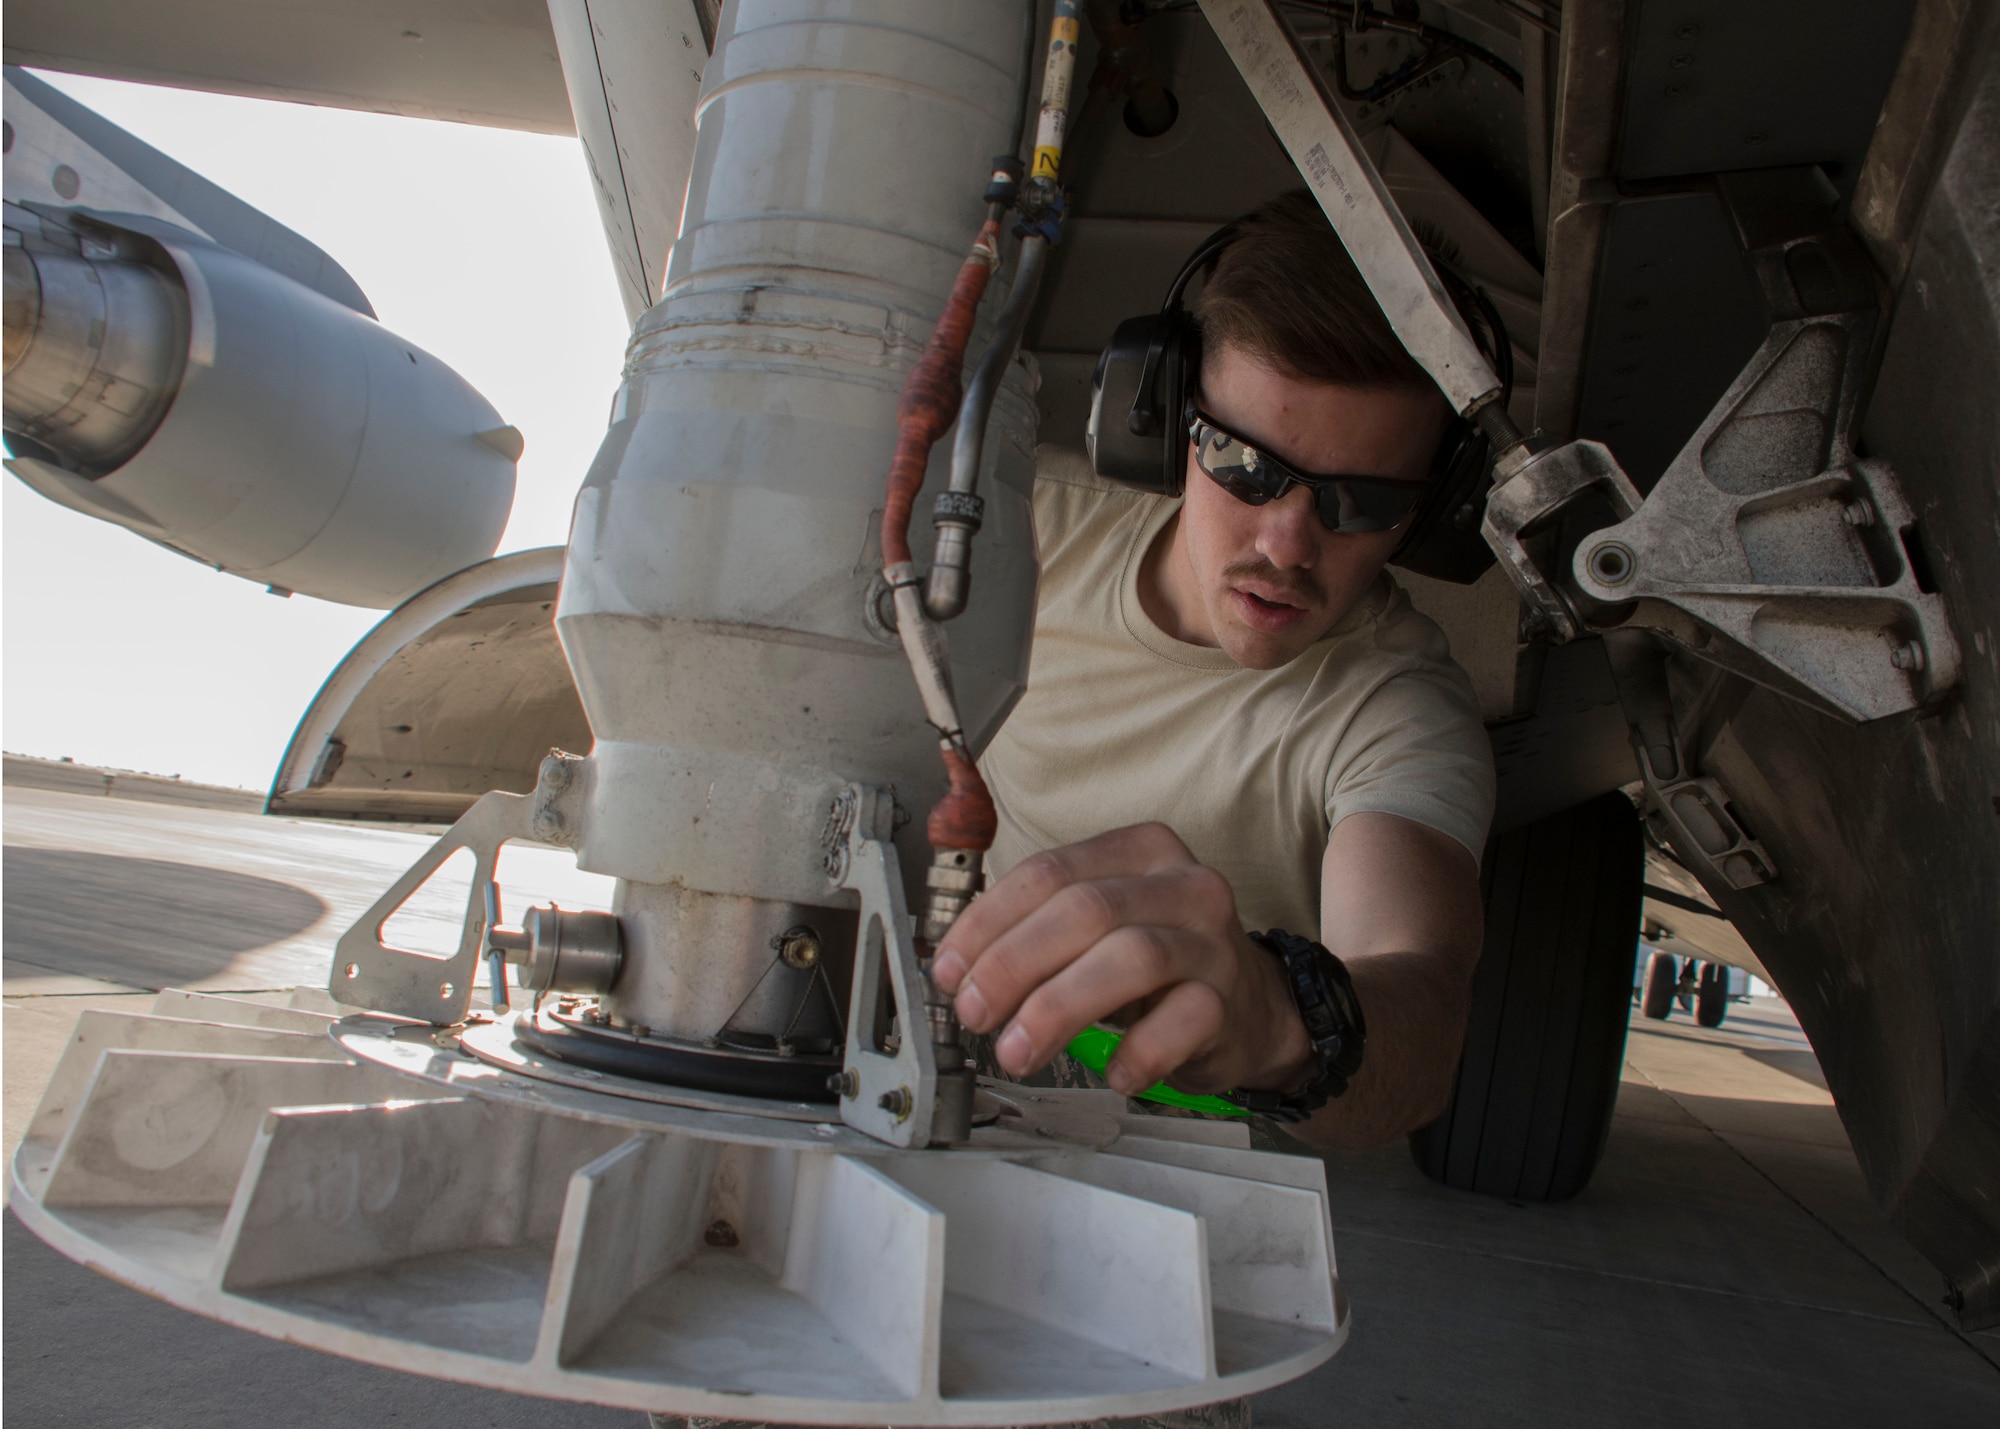 Airman 1st Class Nathan Travis, a 5th Expeditionary Air Mobility Squadron aircraft electrical and environment systems journeyman, inspects wiring on the stabilizer strut of a C-17 Globemaster III at an undisclosed location in Southwest Asia Jan. 13, 2017. Crew chiefs from the small squadron rely on specialists such as electricians to help out with inspections. (U.S. Air Force photo/Senior Airman Andrew Park)